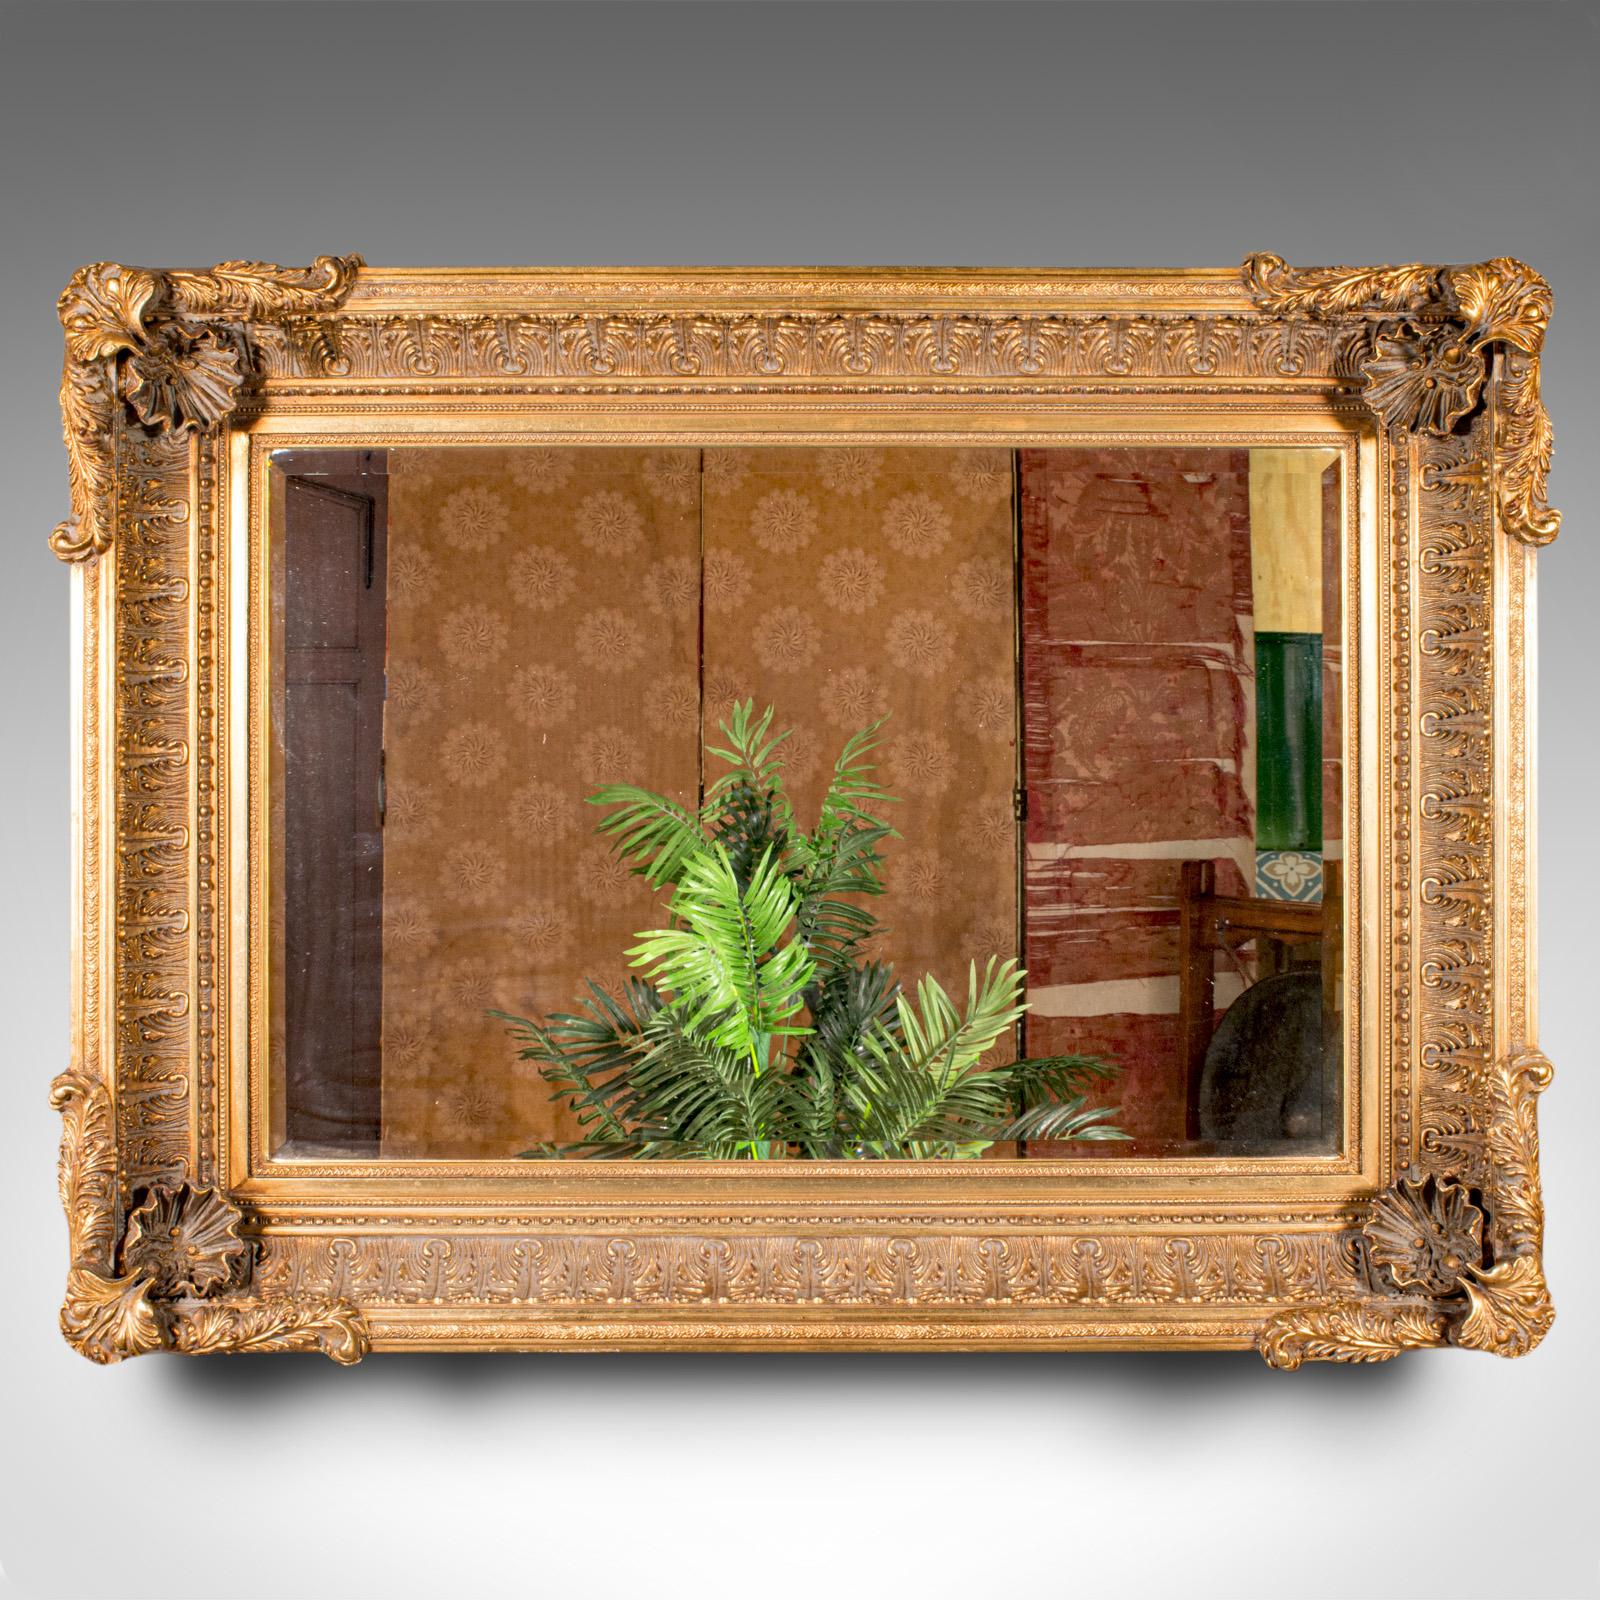 This is a large vintage Renaissance revival wall mirror. A Continental, giltwood and glass decorative mirror, dating to the late 20th century, circa 1970.

Of grand proportion and delightfully ornate
Displays a desirable aged patina and in good